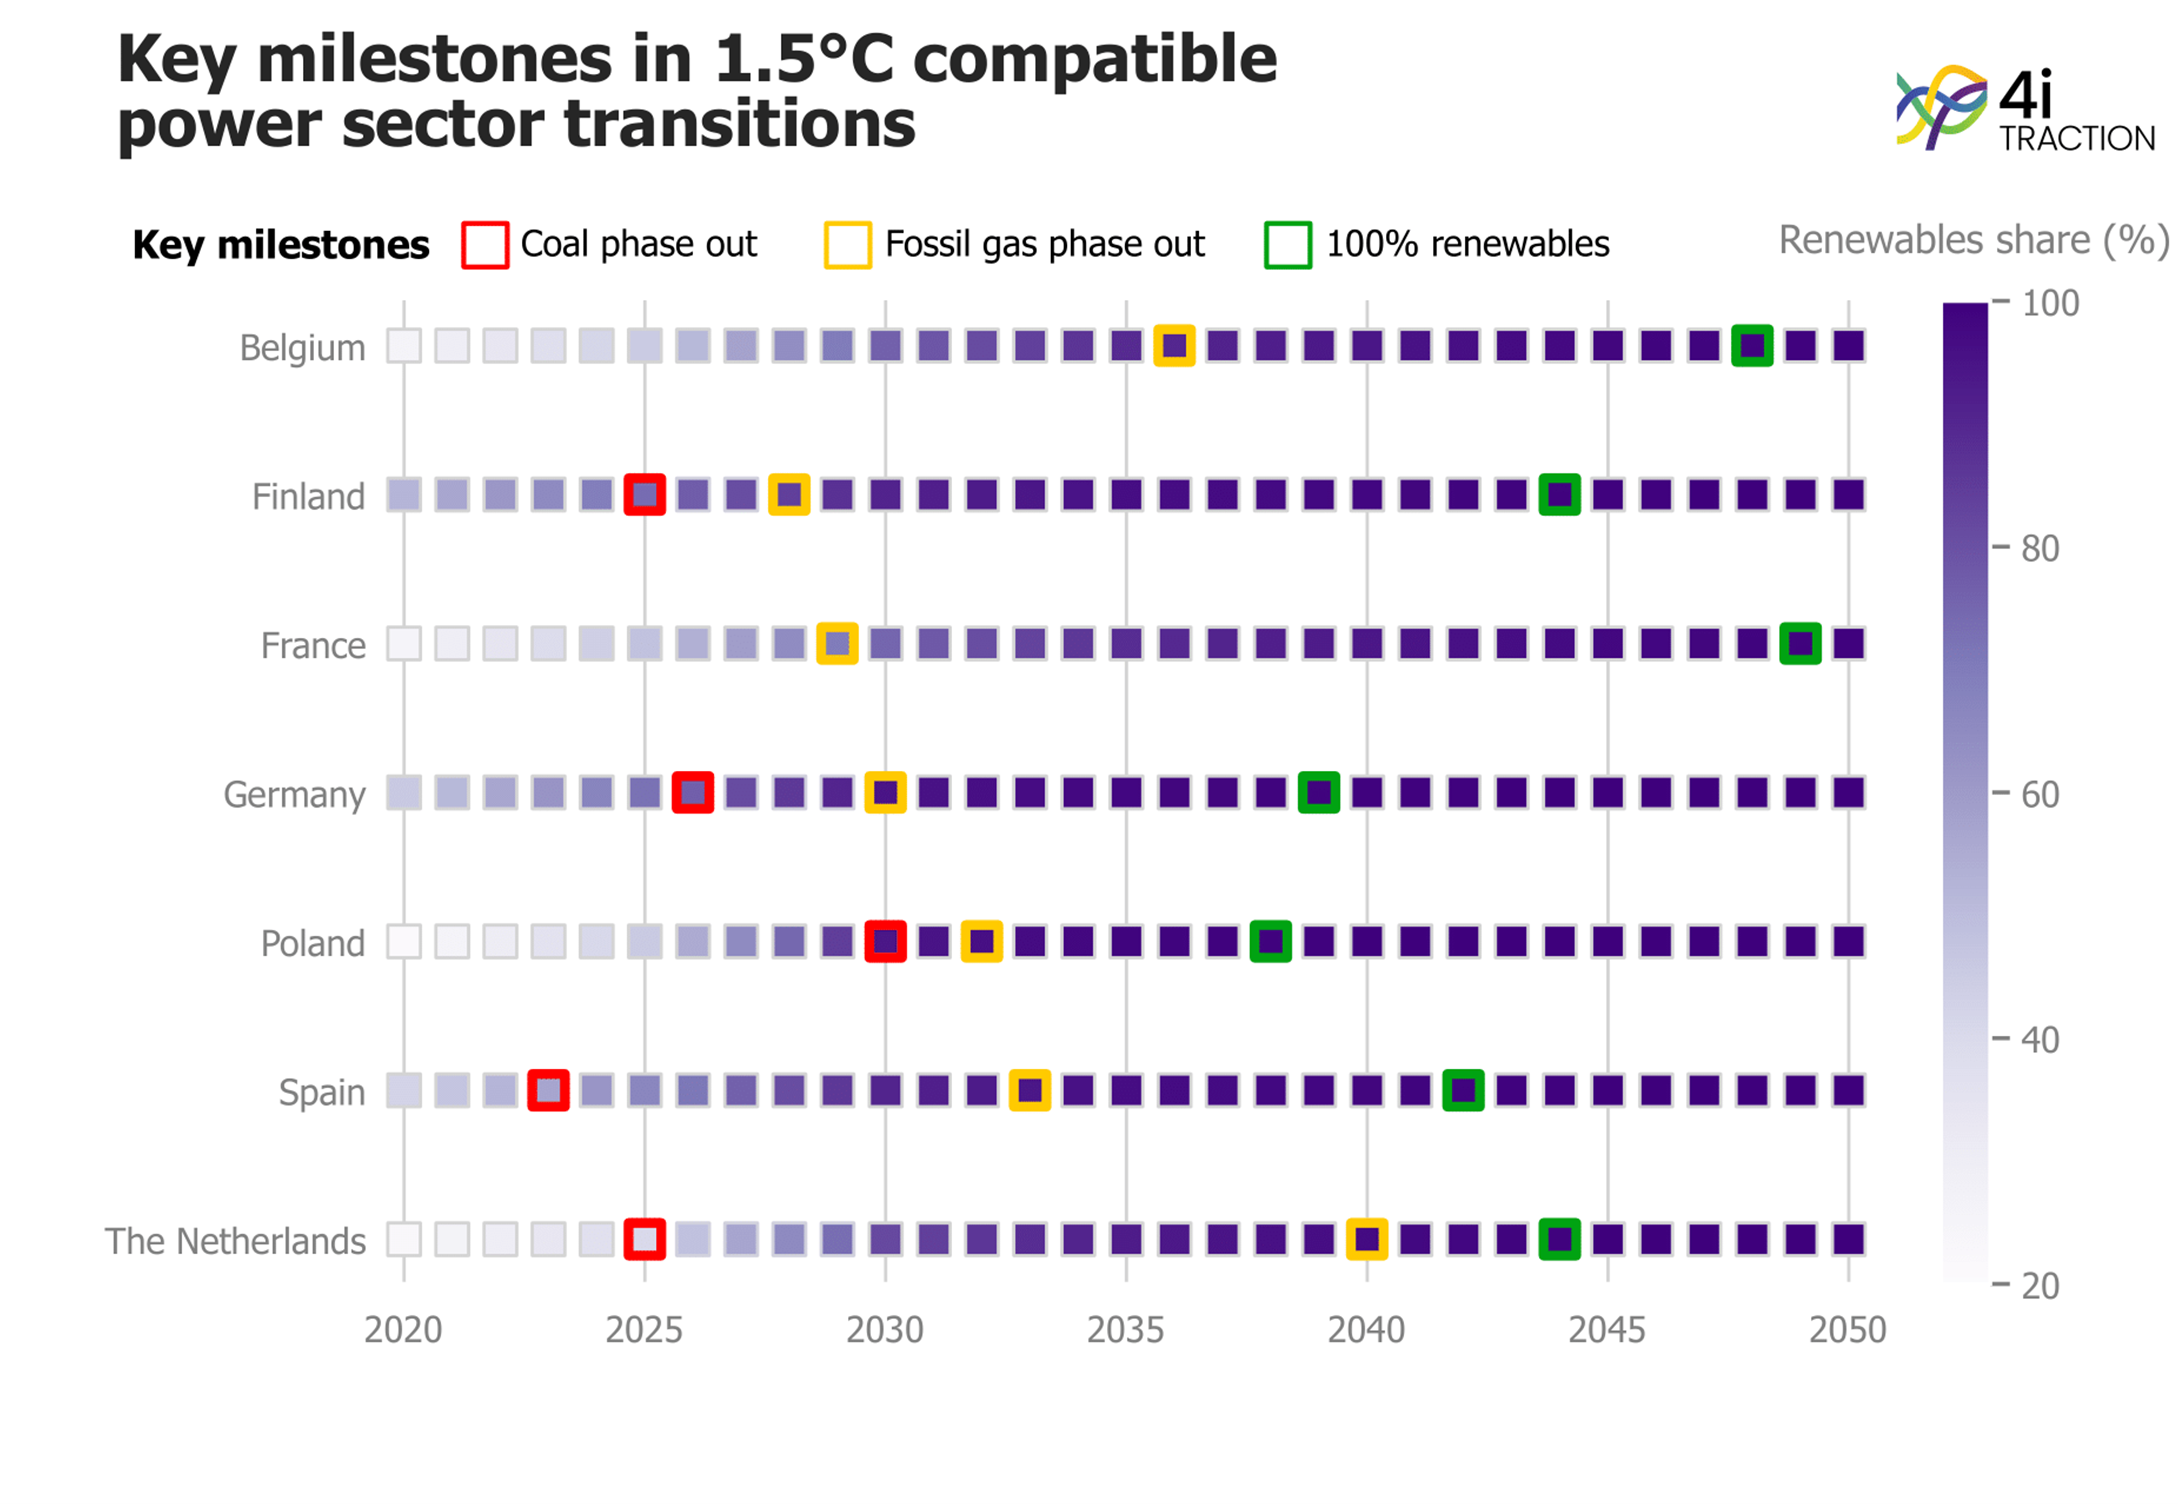 Key milestones in 1.5°C compatible power sector transitions